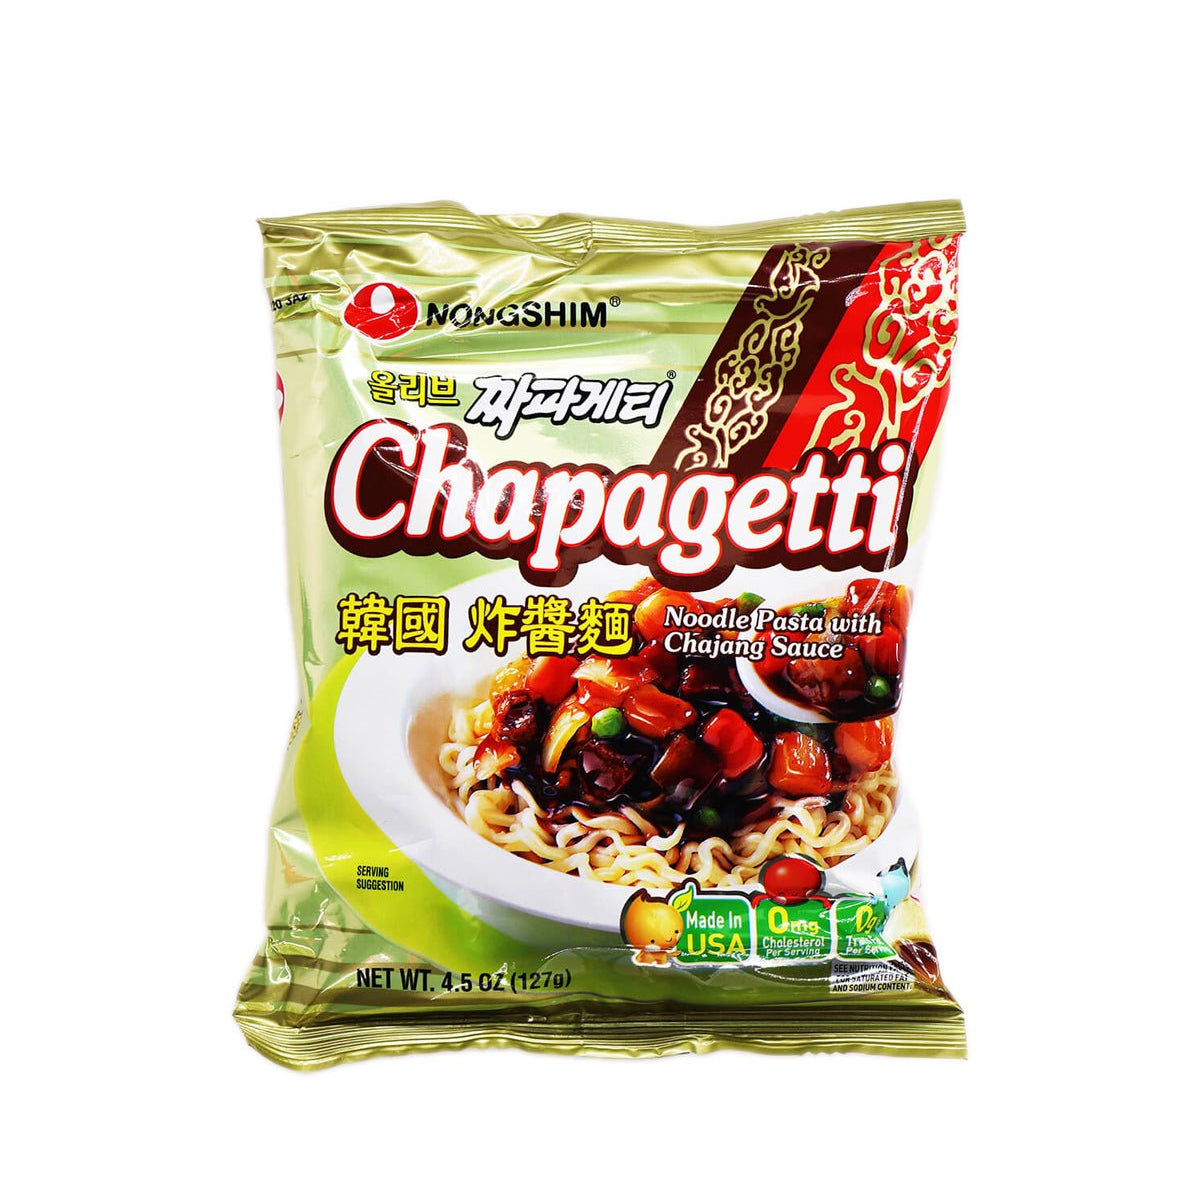 Nongshim Chapagetti Chajang Noodle, 4.5 Ounce Packages (Pack of 20)